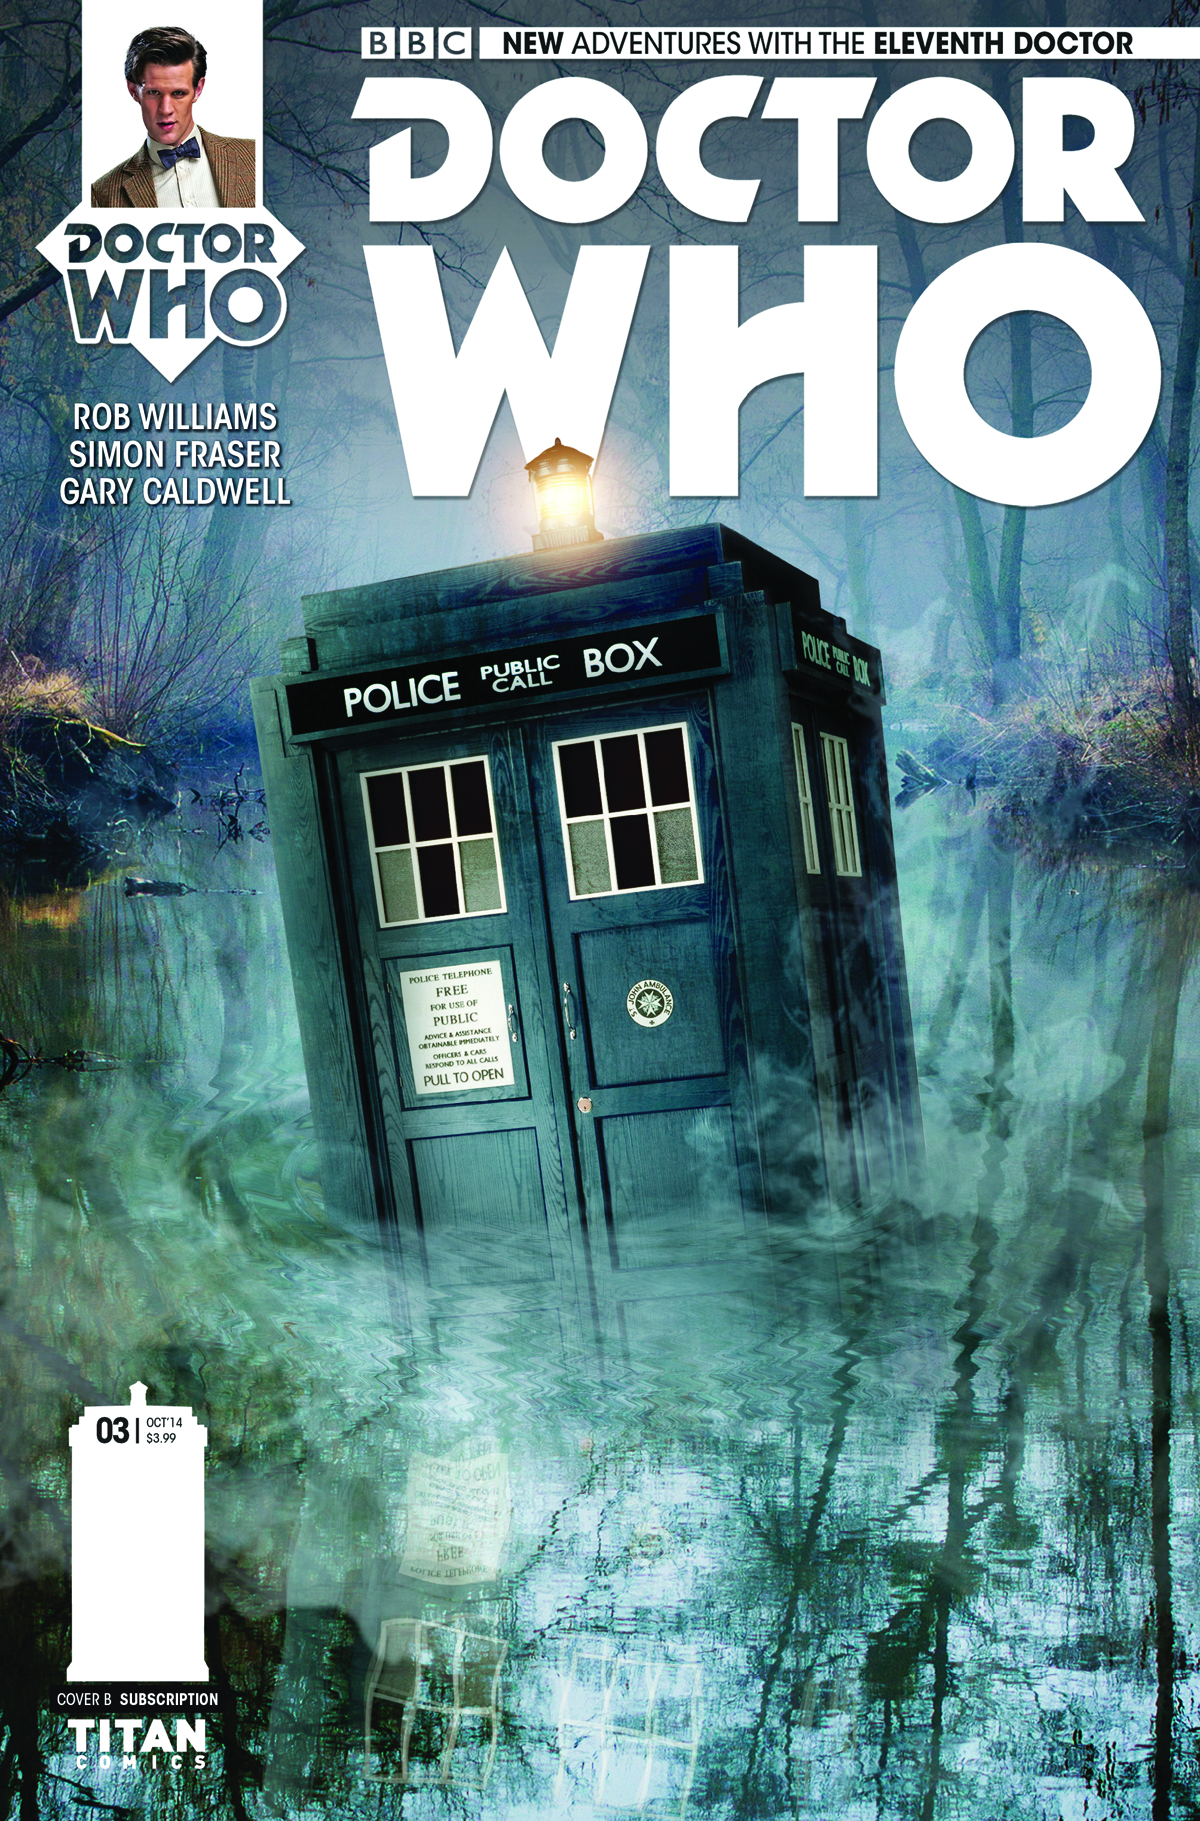 DOCTOR WHO 11TH #3 SUBSCRIPTION PHOTO